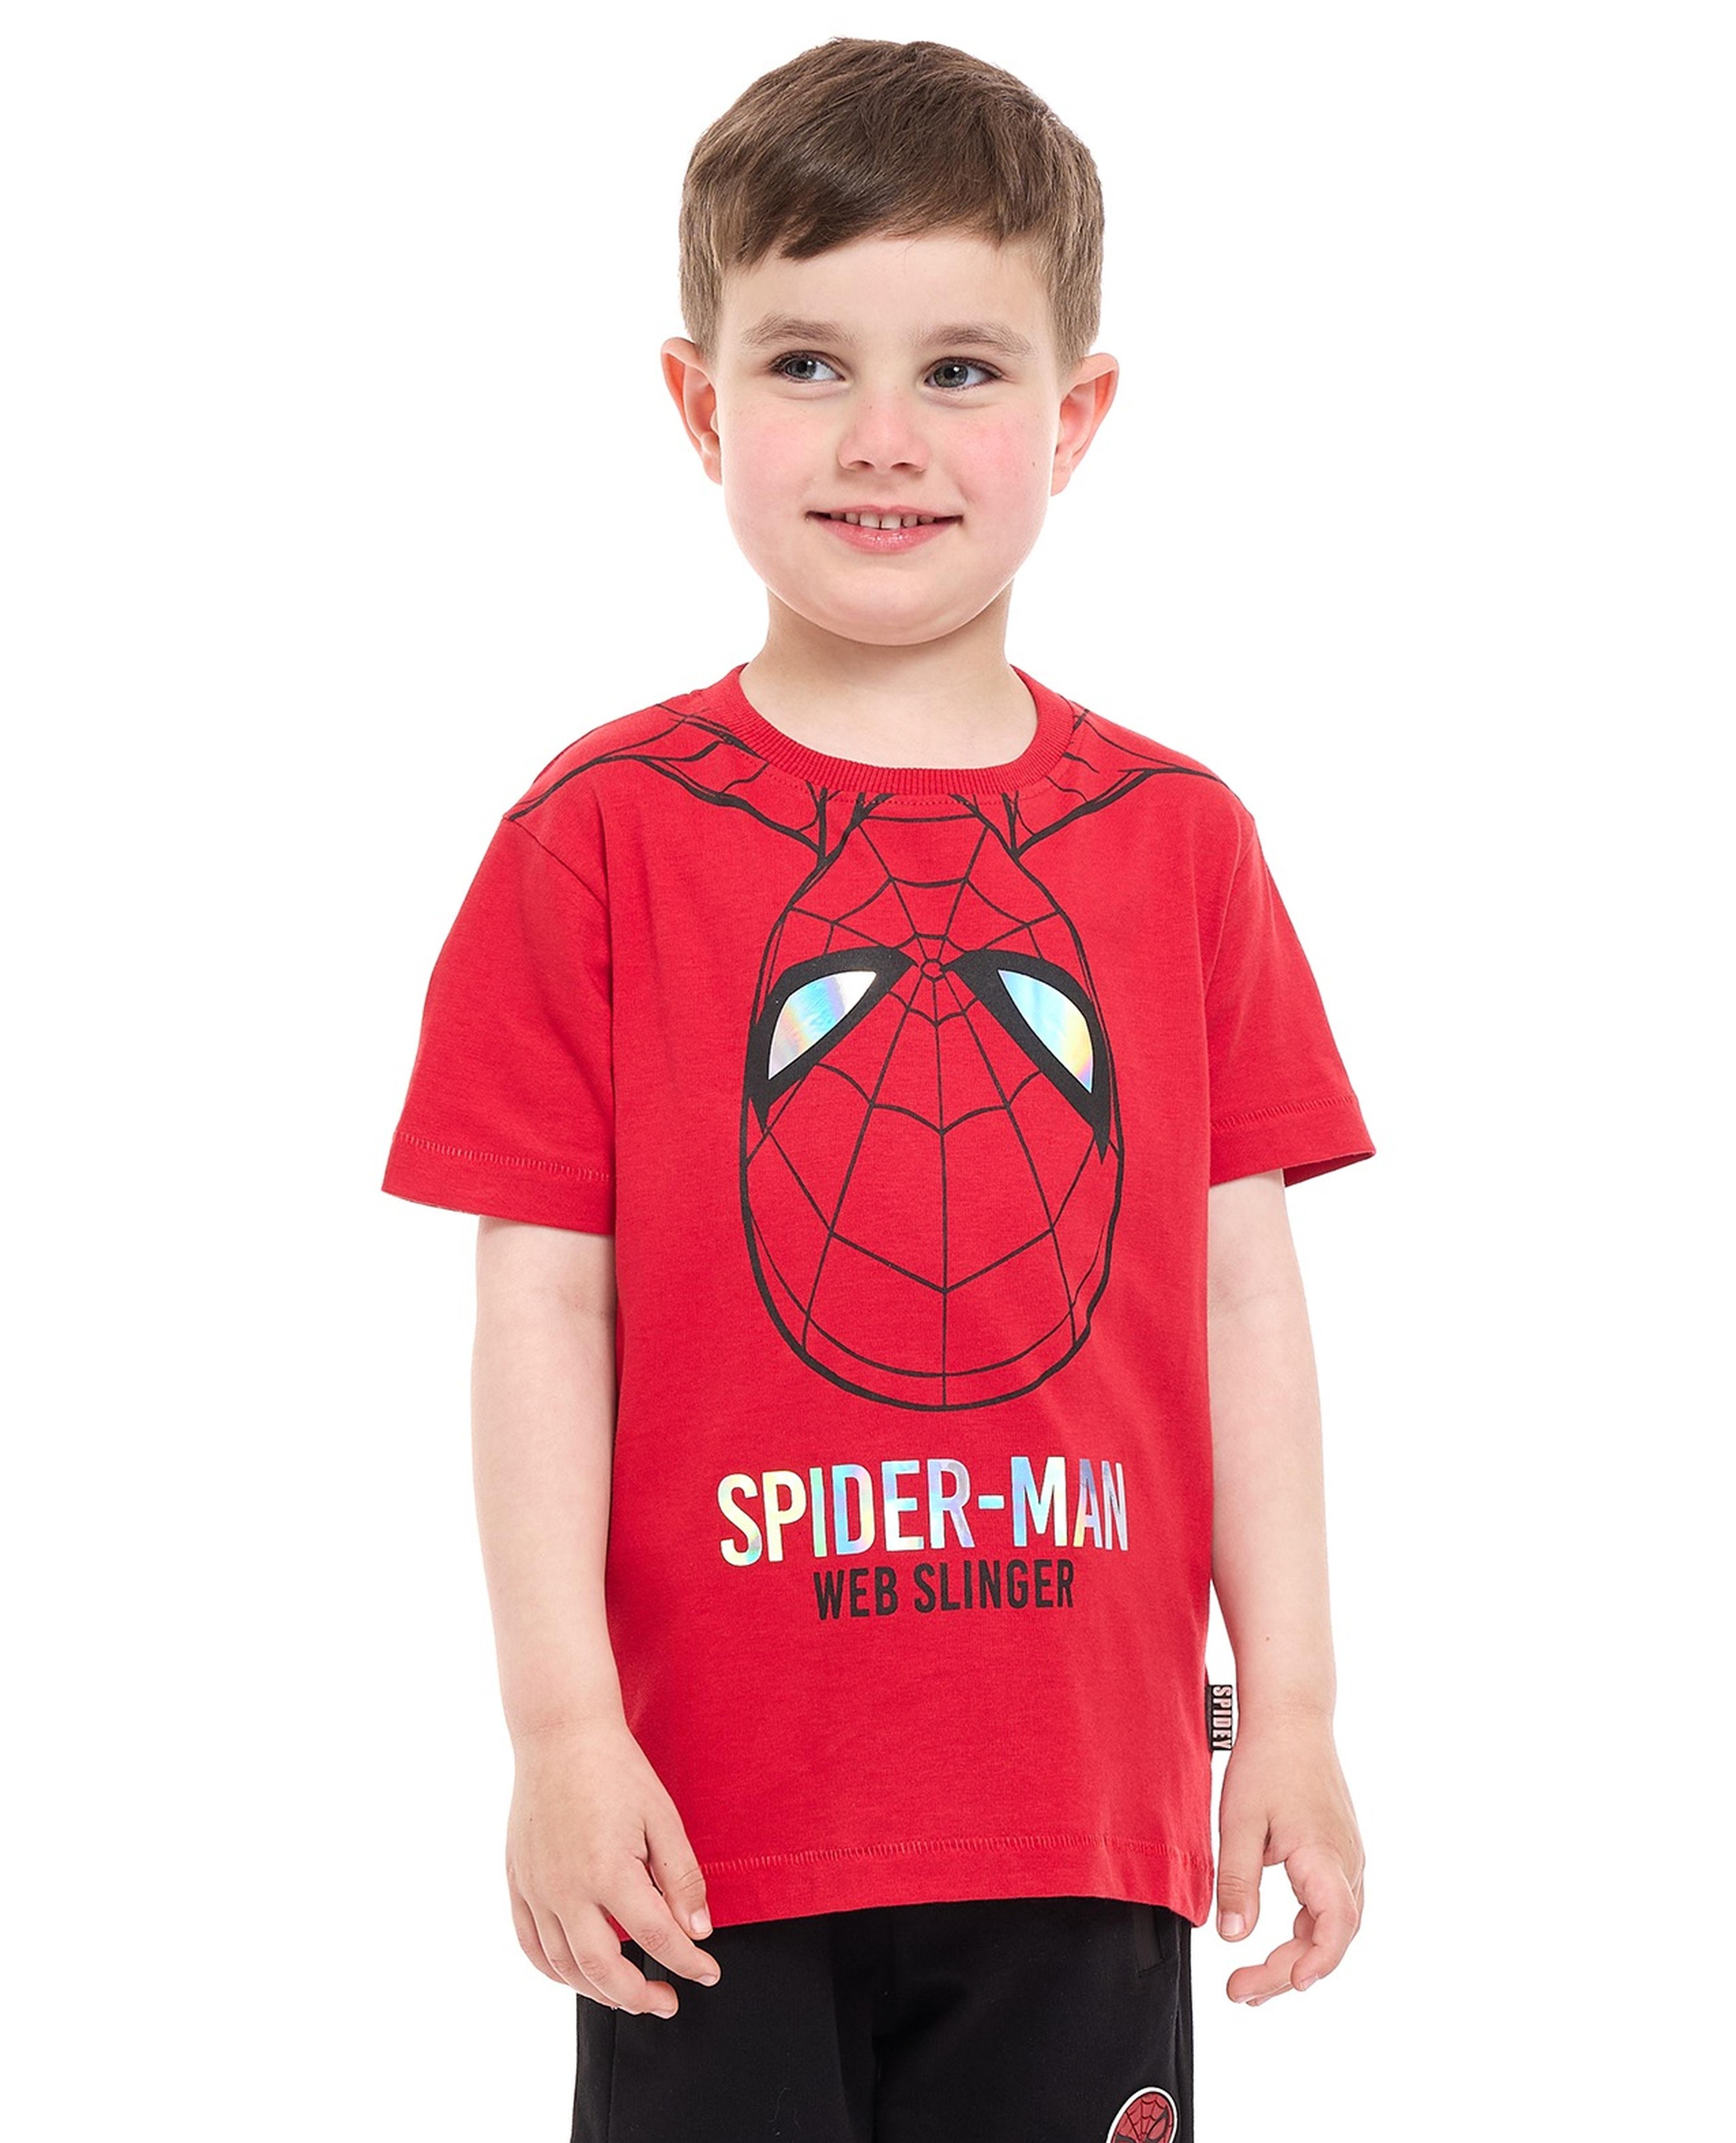 Spider-Man T-Shirt with Crew Neck and Short Sleeves